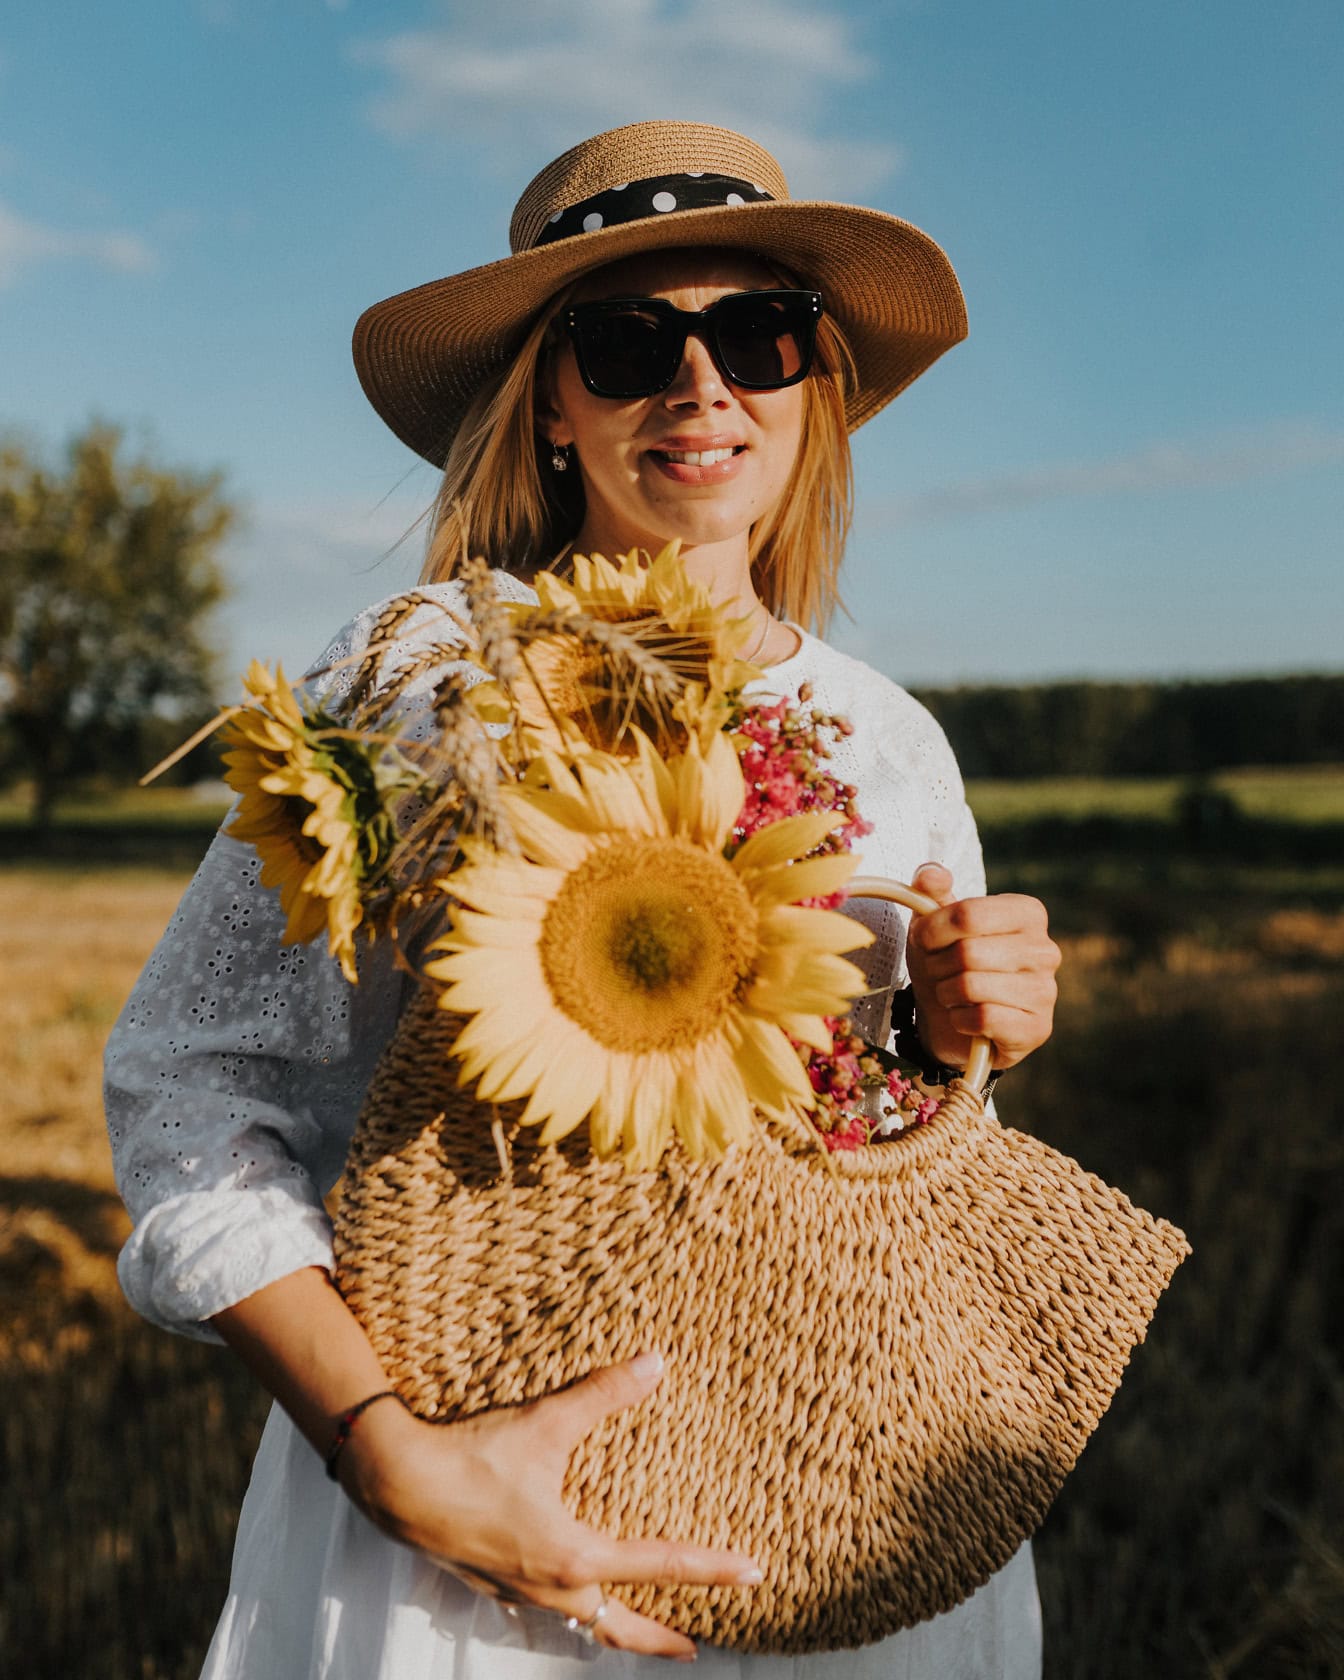 Beautiful young blonde wears a straw hat and sunglasses while holding a knitted sunflower bag in the field